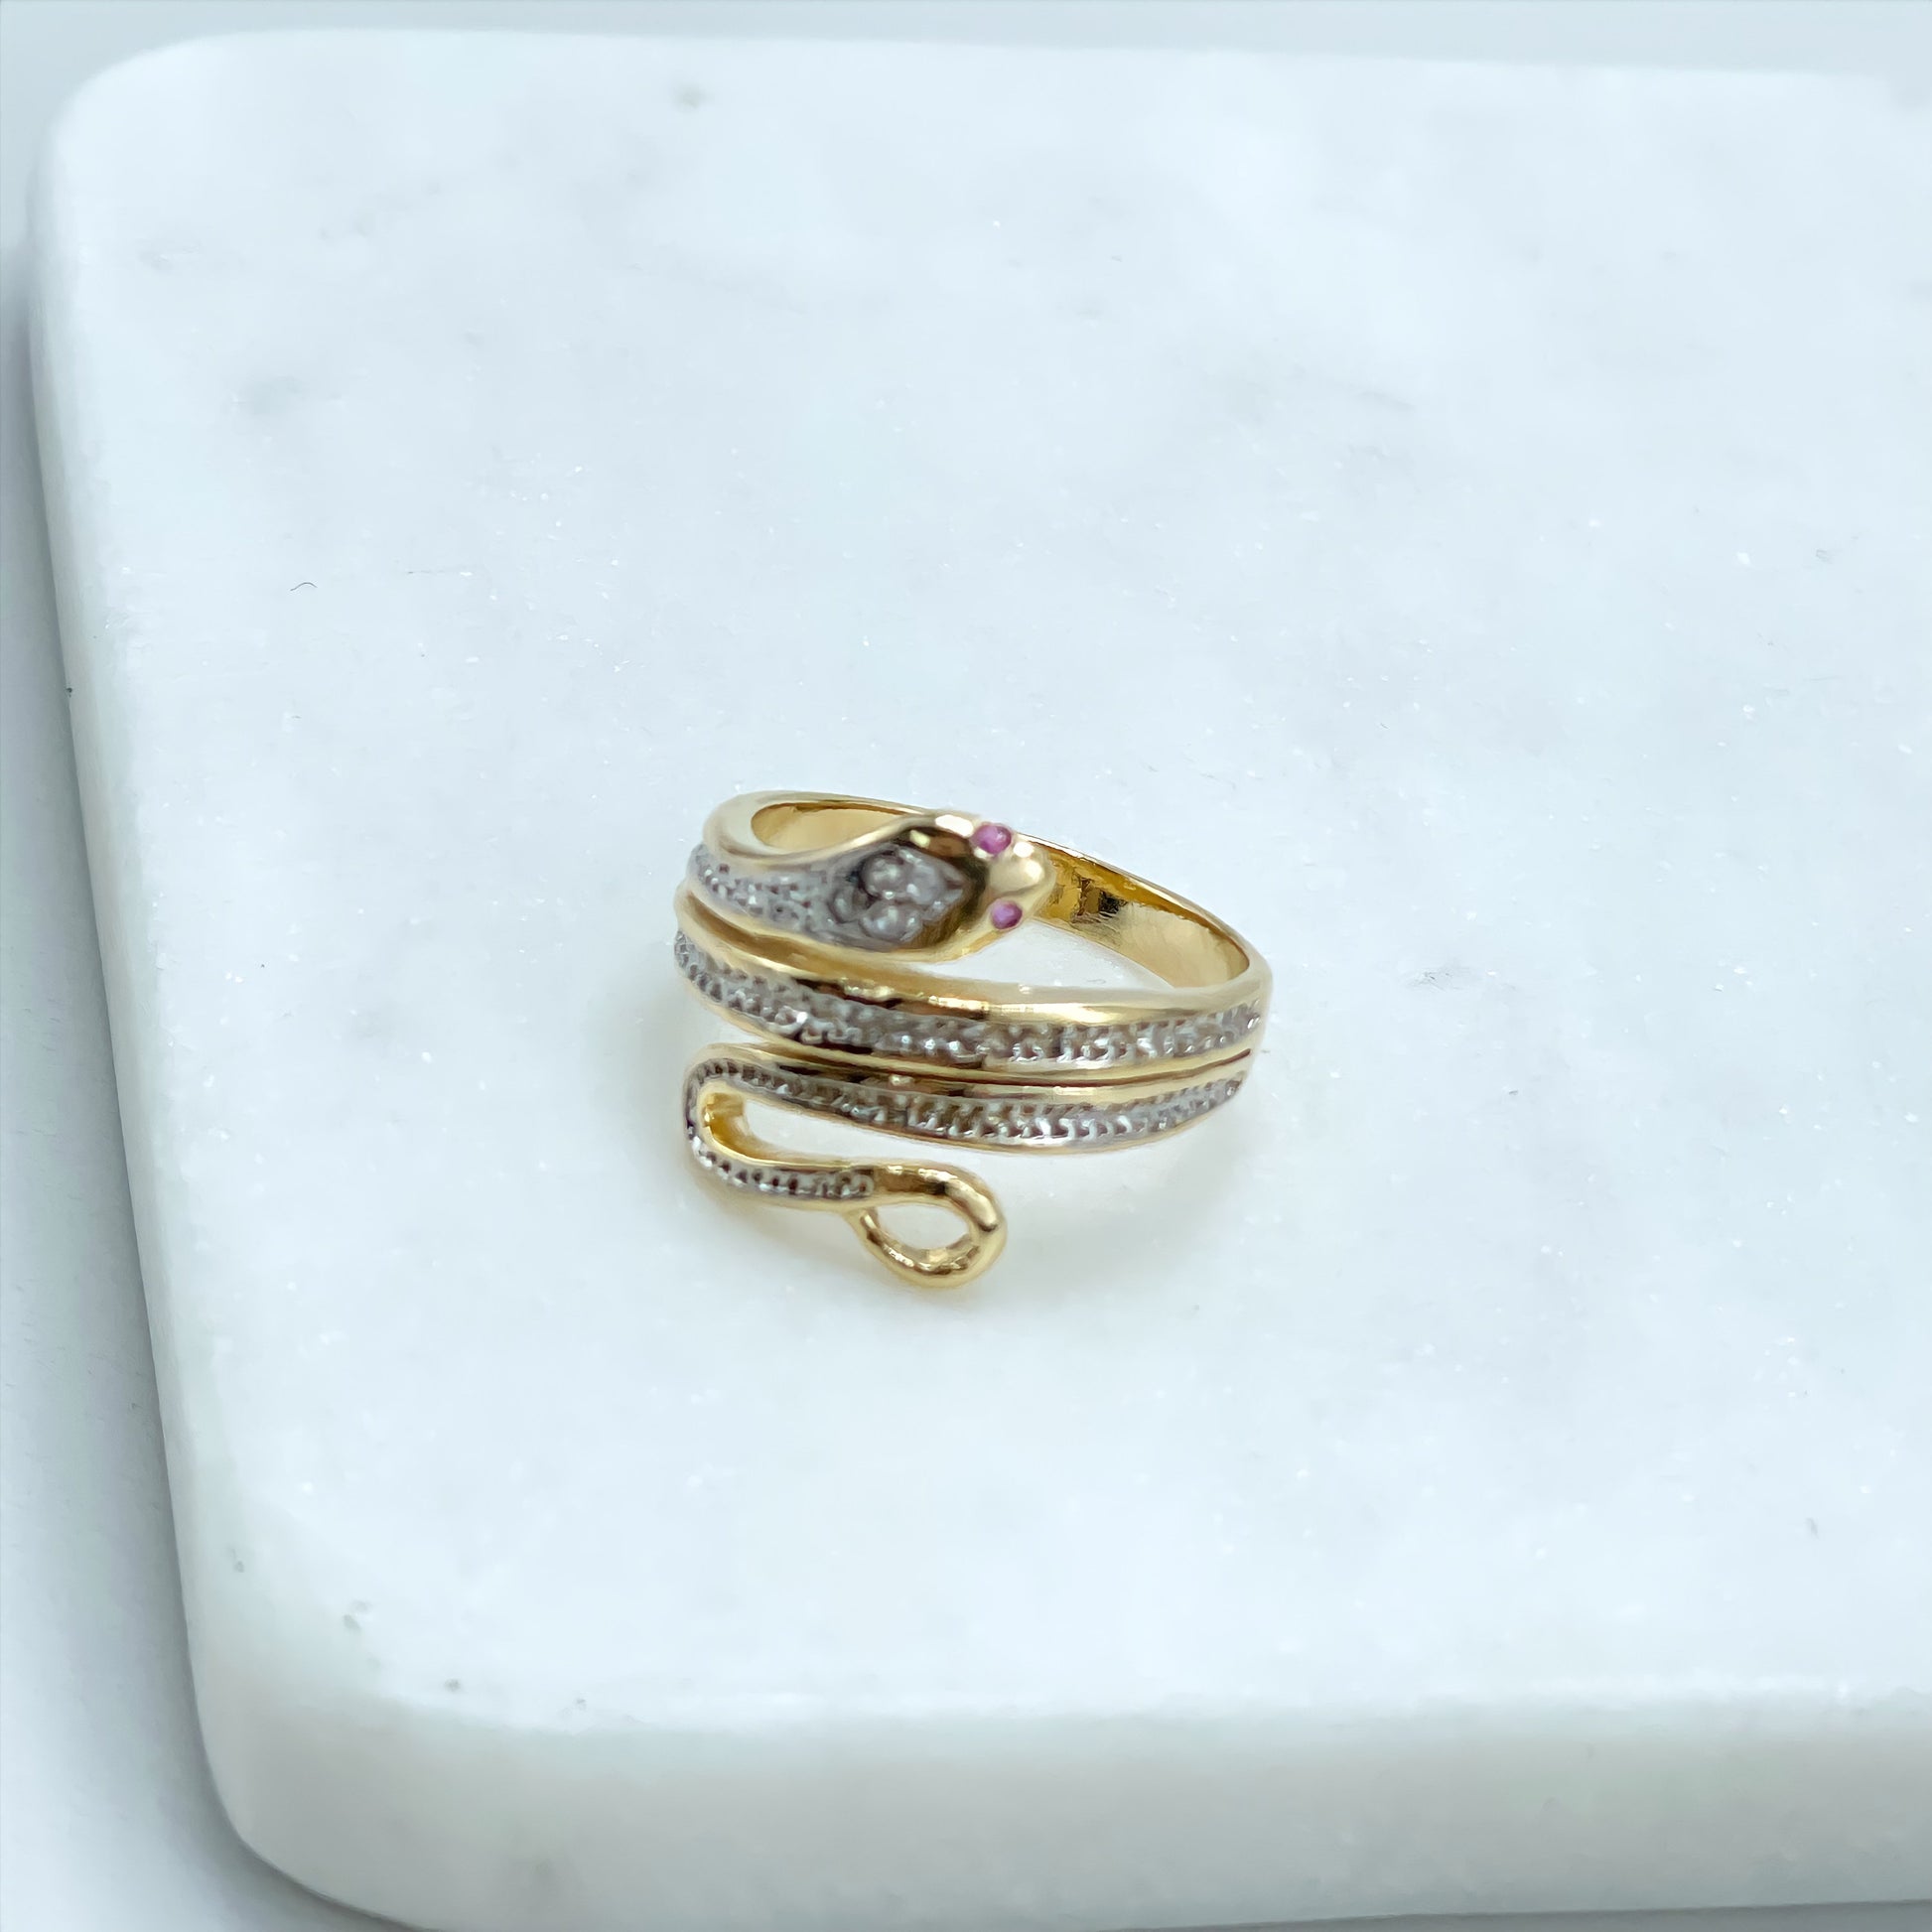 18k Gold Filled With Micro Cubic Zirconia and Silver Filled Sake Ring Wholesale Jewelry Supplies